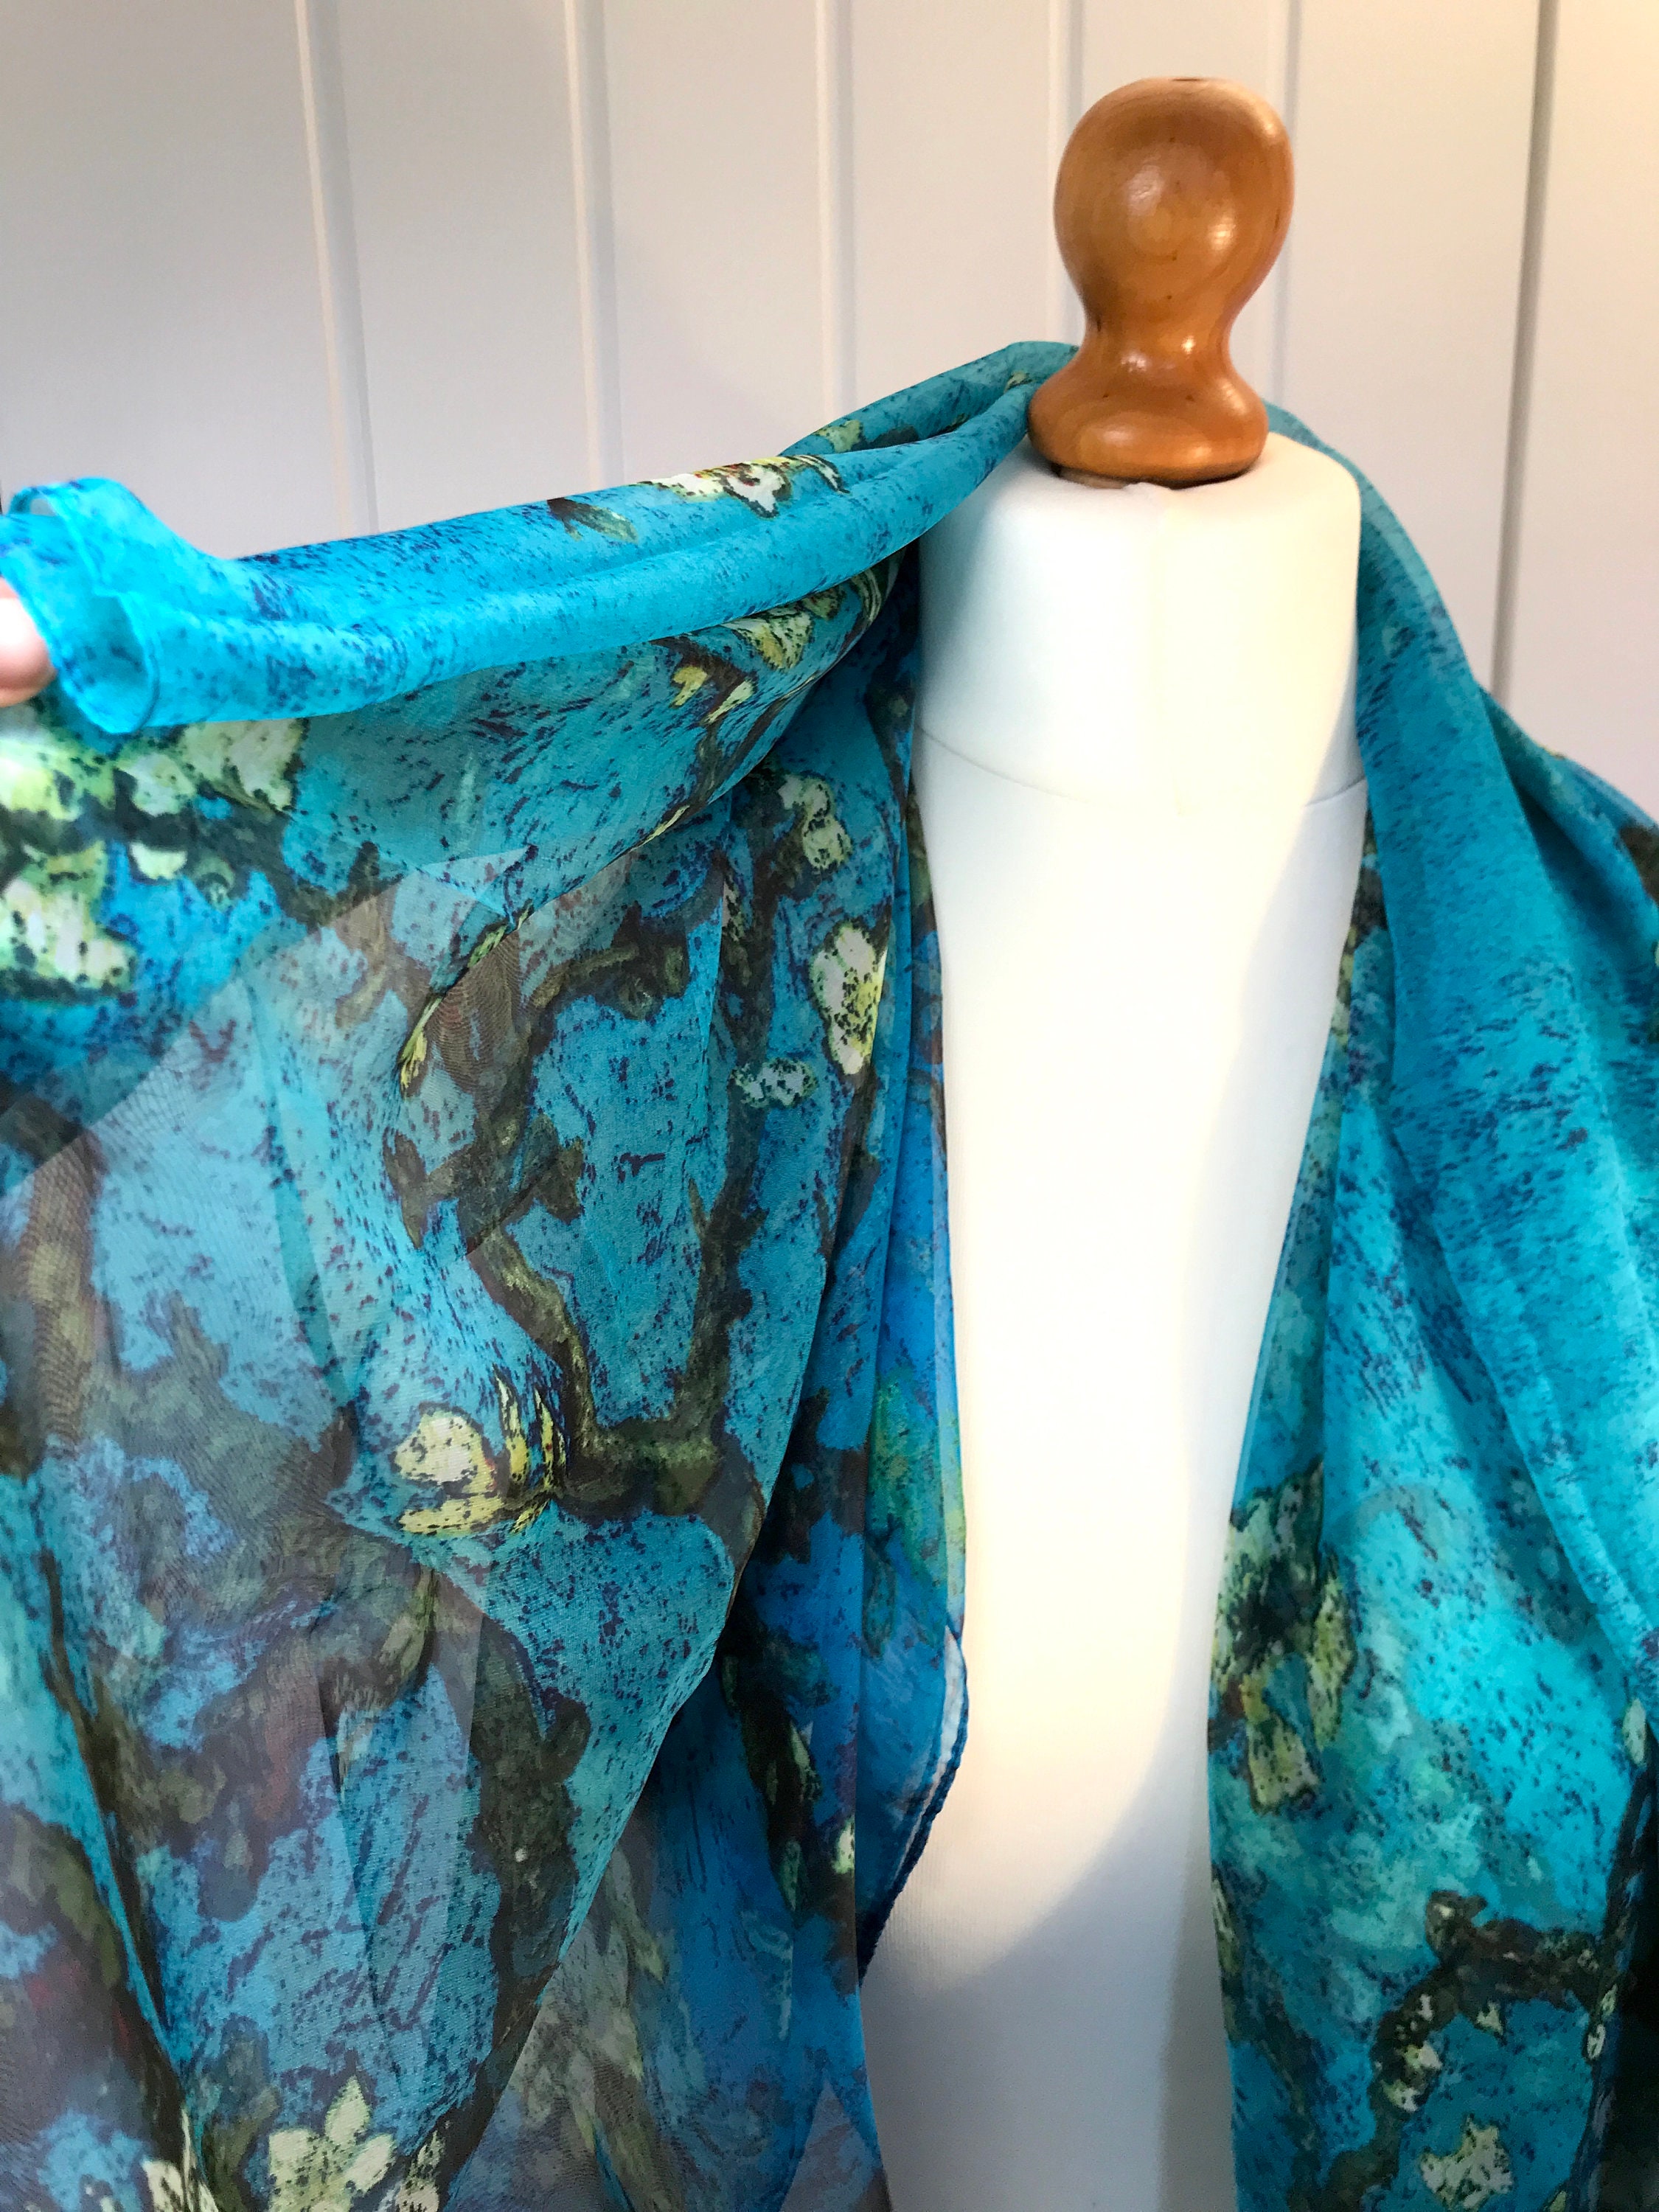 Gorgeous Delicate Silky Scarf Van Gogh's Turquoise - Etsy